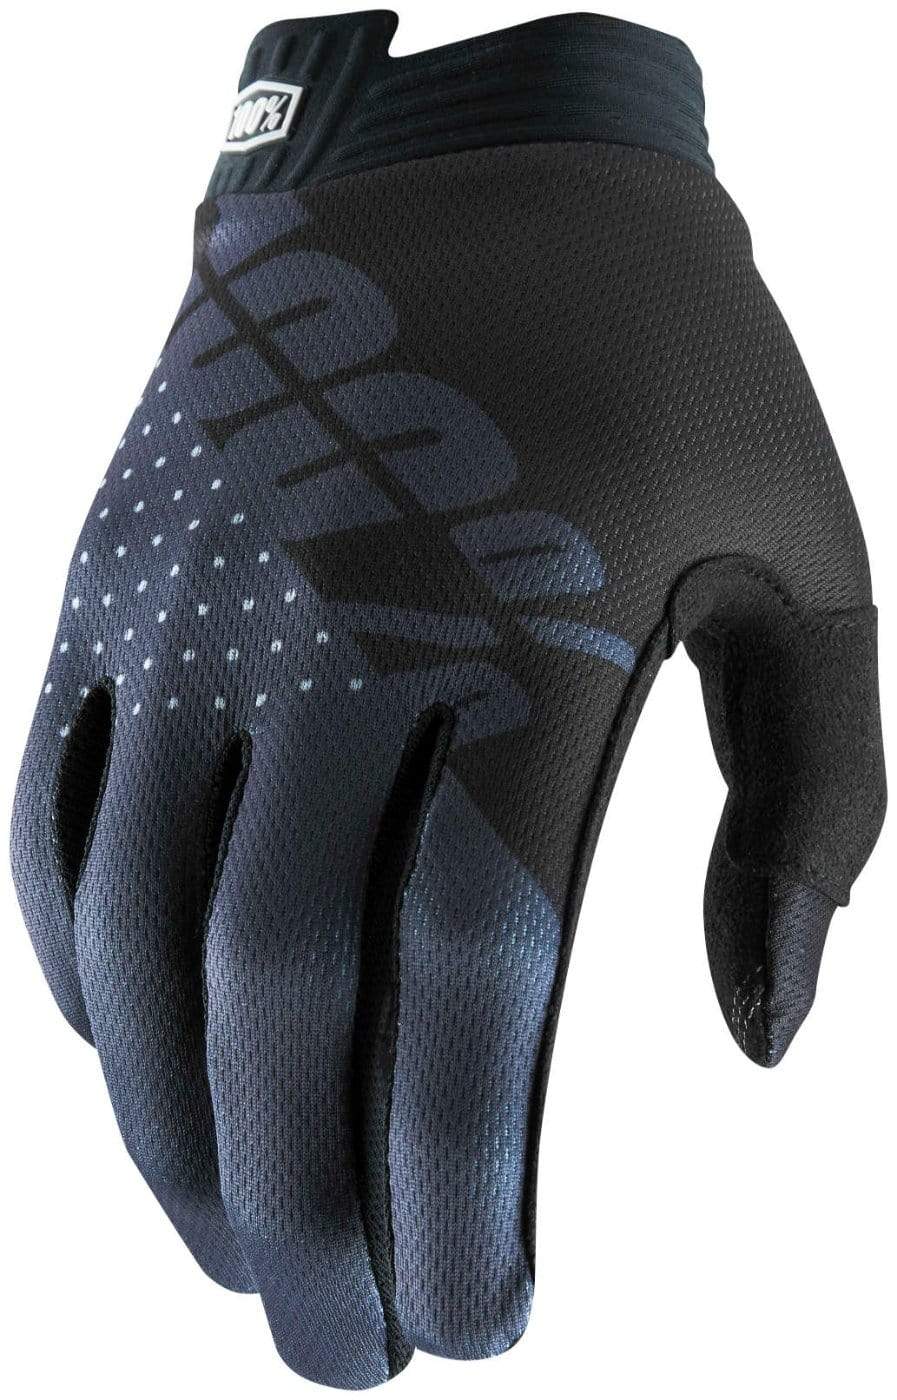 100% Apparel 100% Youth iTrack Gloves Black/Charcoal